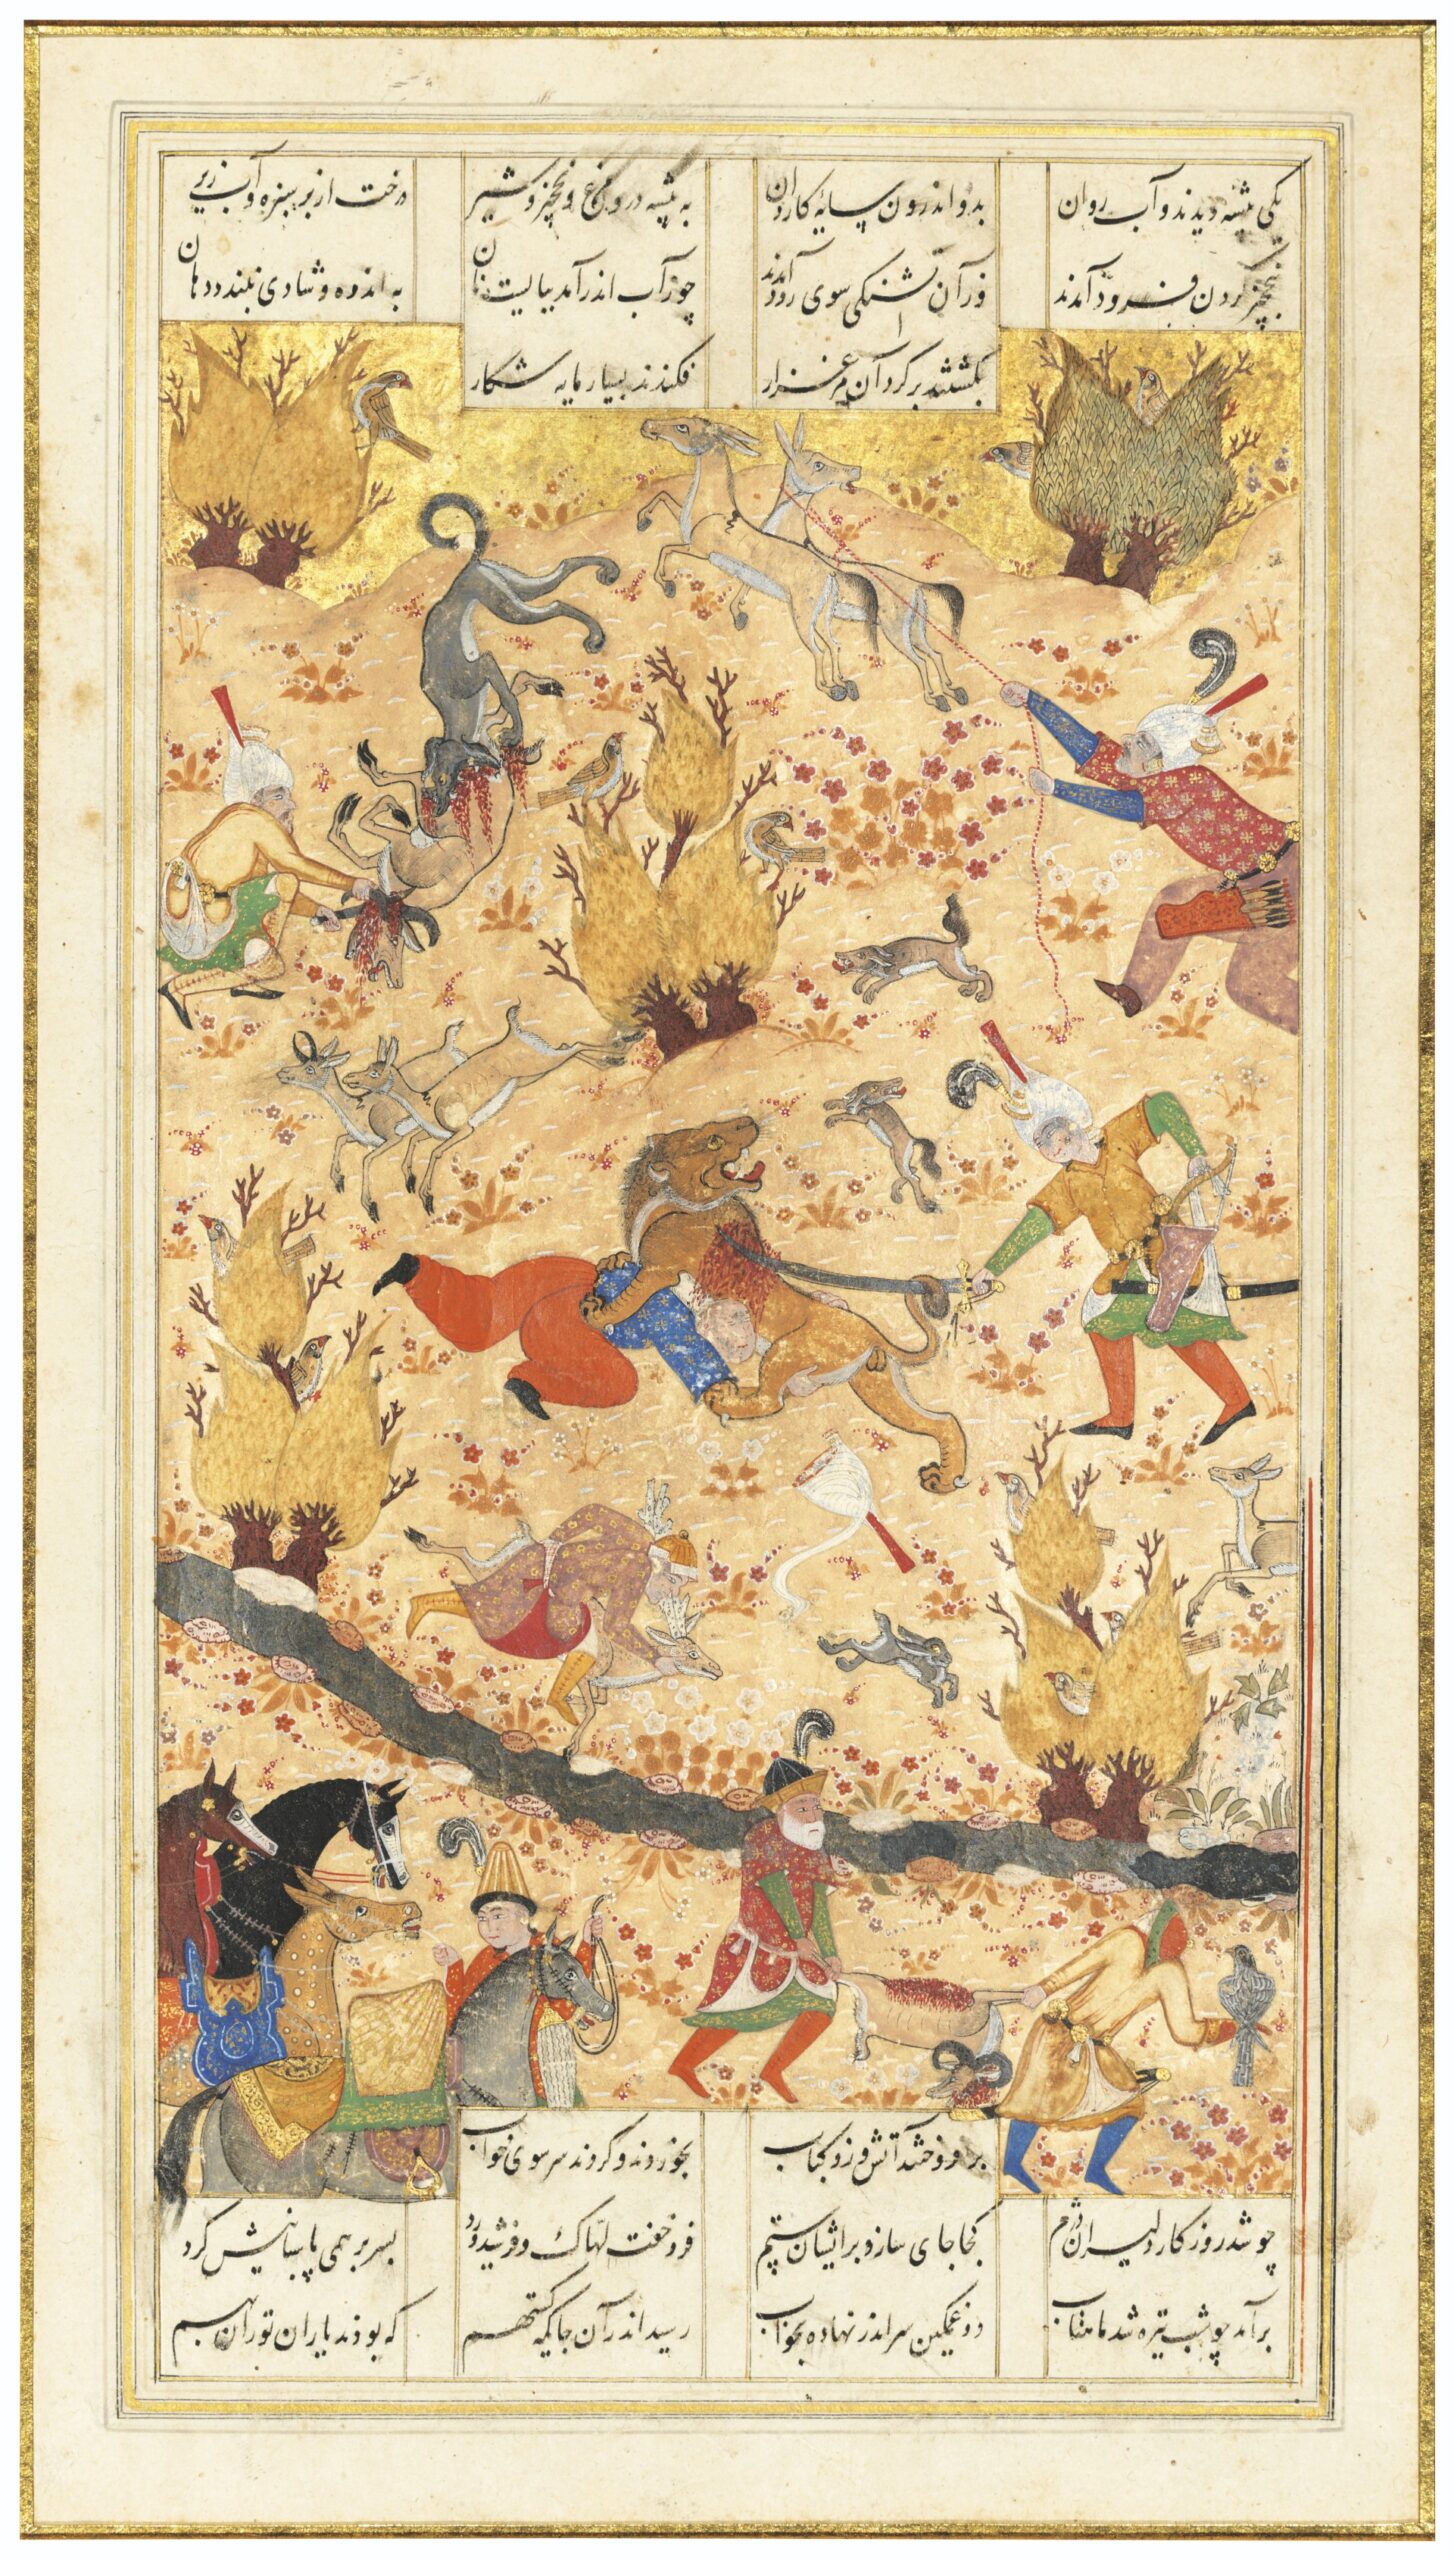 THE HEROES LAHHAK AND FARSHIDVARD HUNT, FROM THE STORY OF THE TWELVE CHAMPIONS (DAVAZDA RUKH)